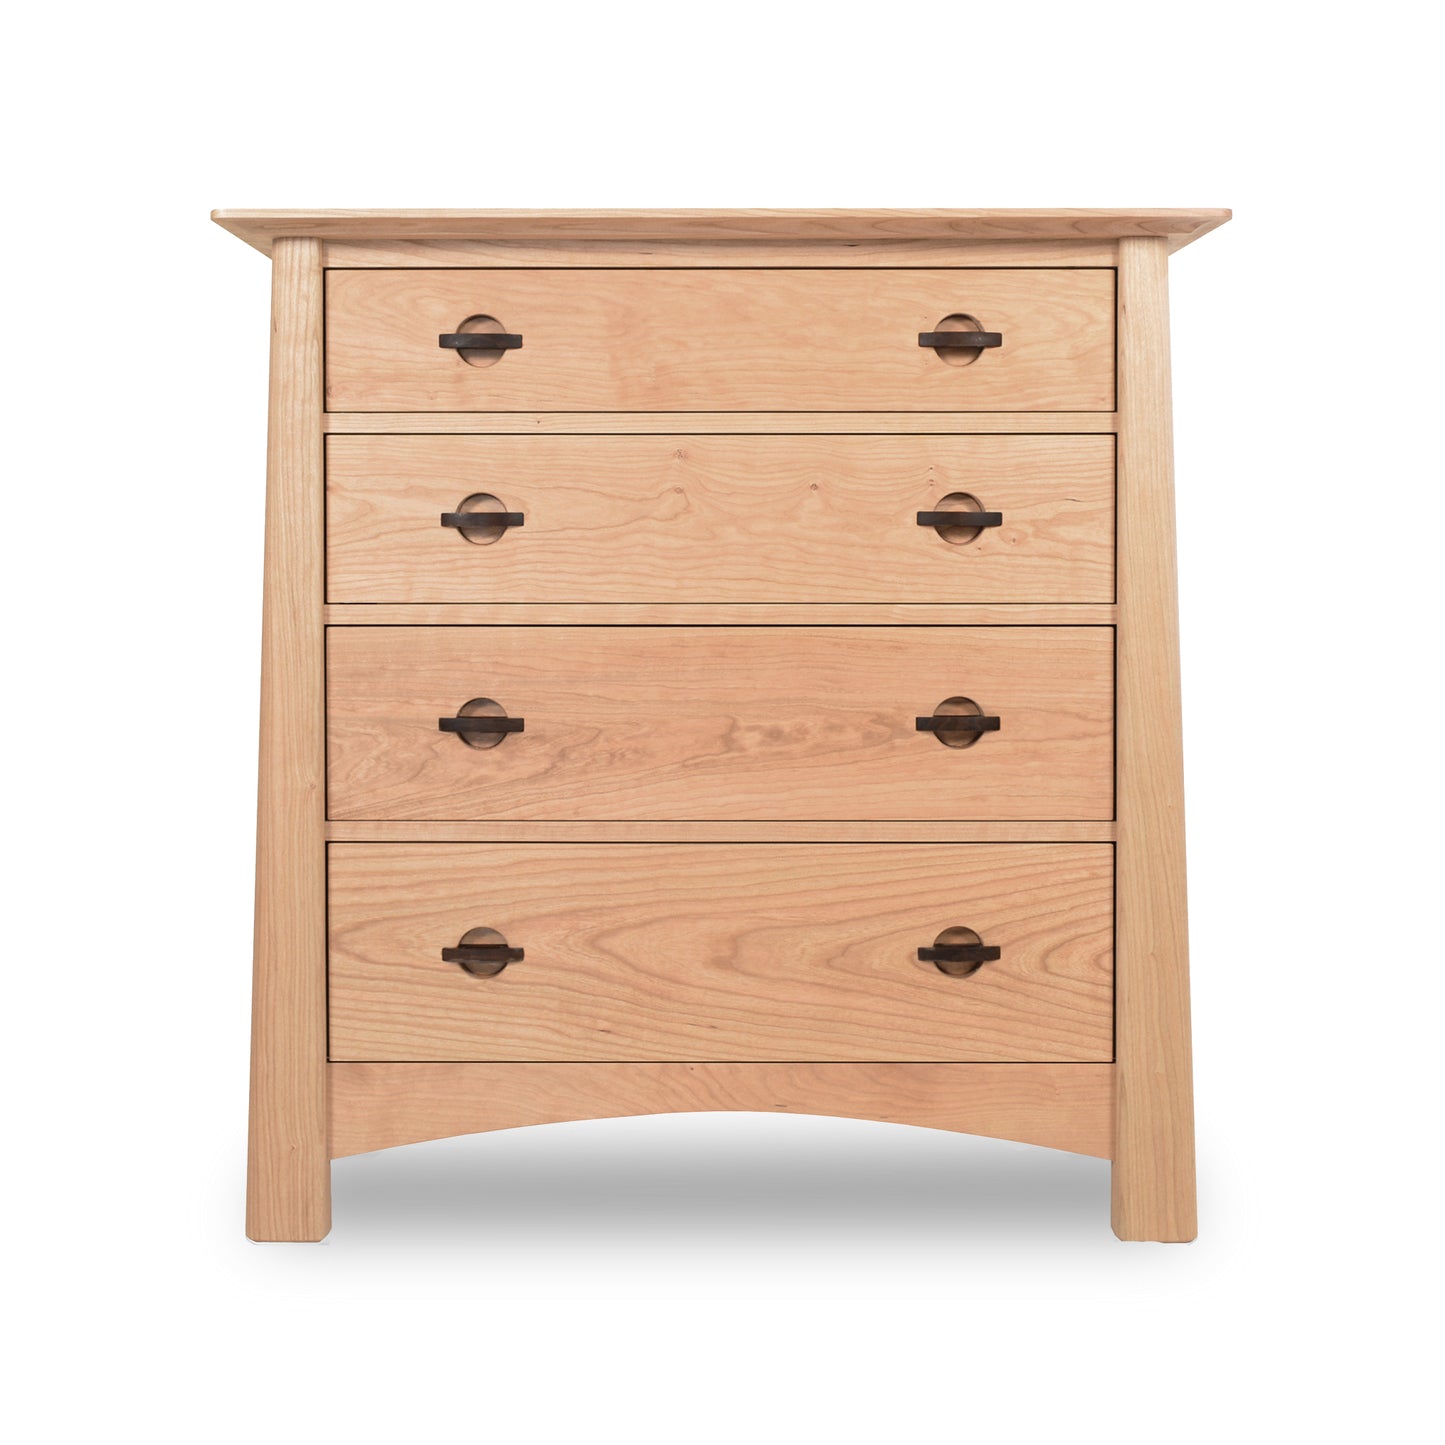 A Cherry Moon 4-Drawer Chest with rounded handles on a plain white background. The dresser is made of light-colored wood and showcases Maple Corner Woodworks craftsmanship in its simple, sturdy design.